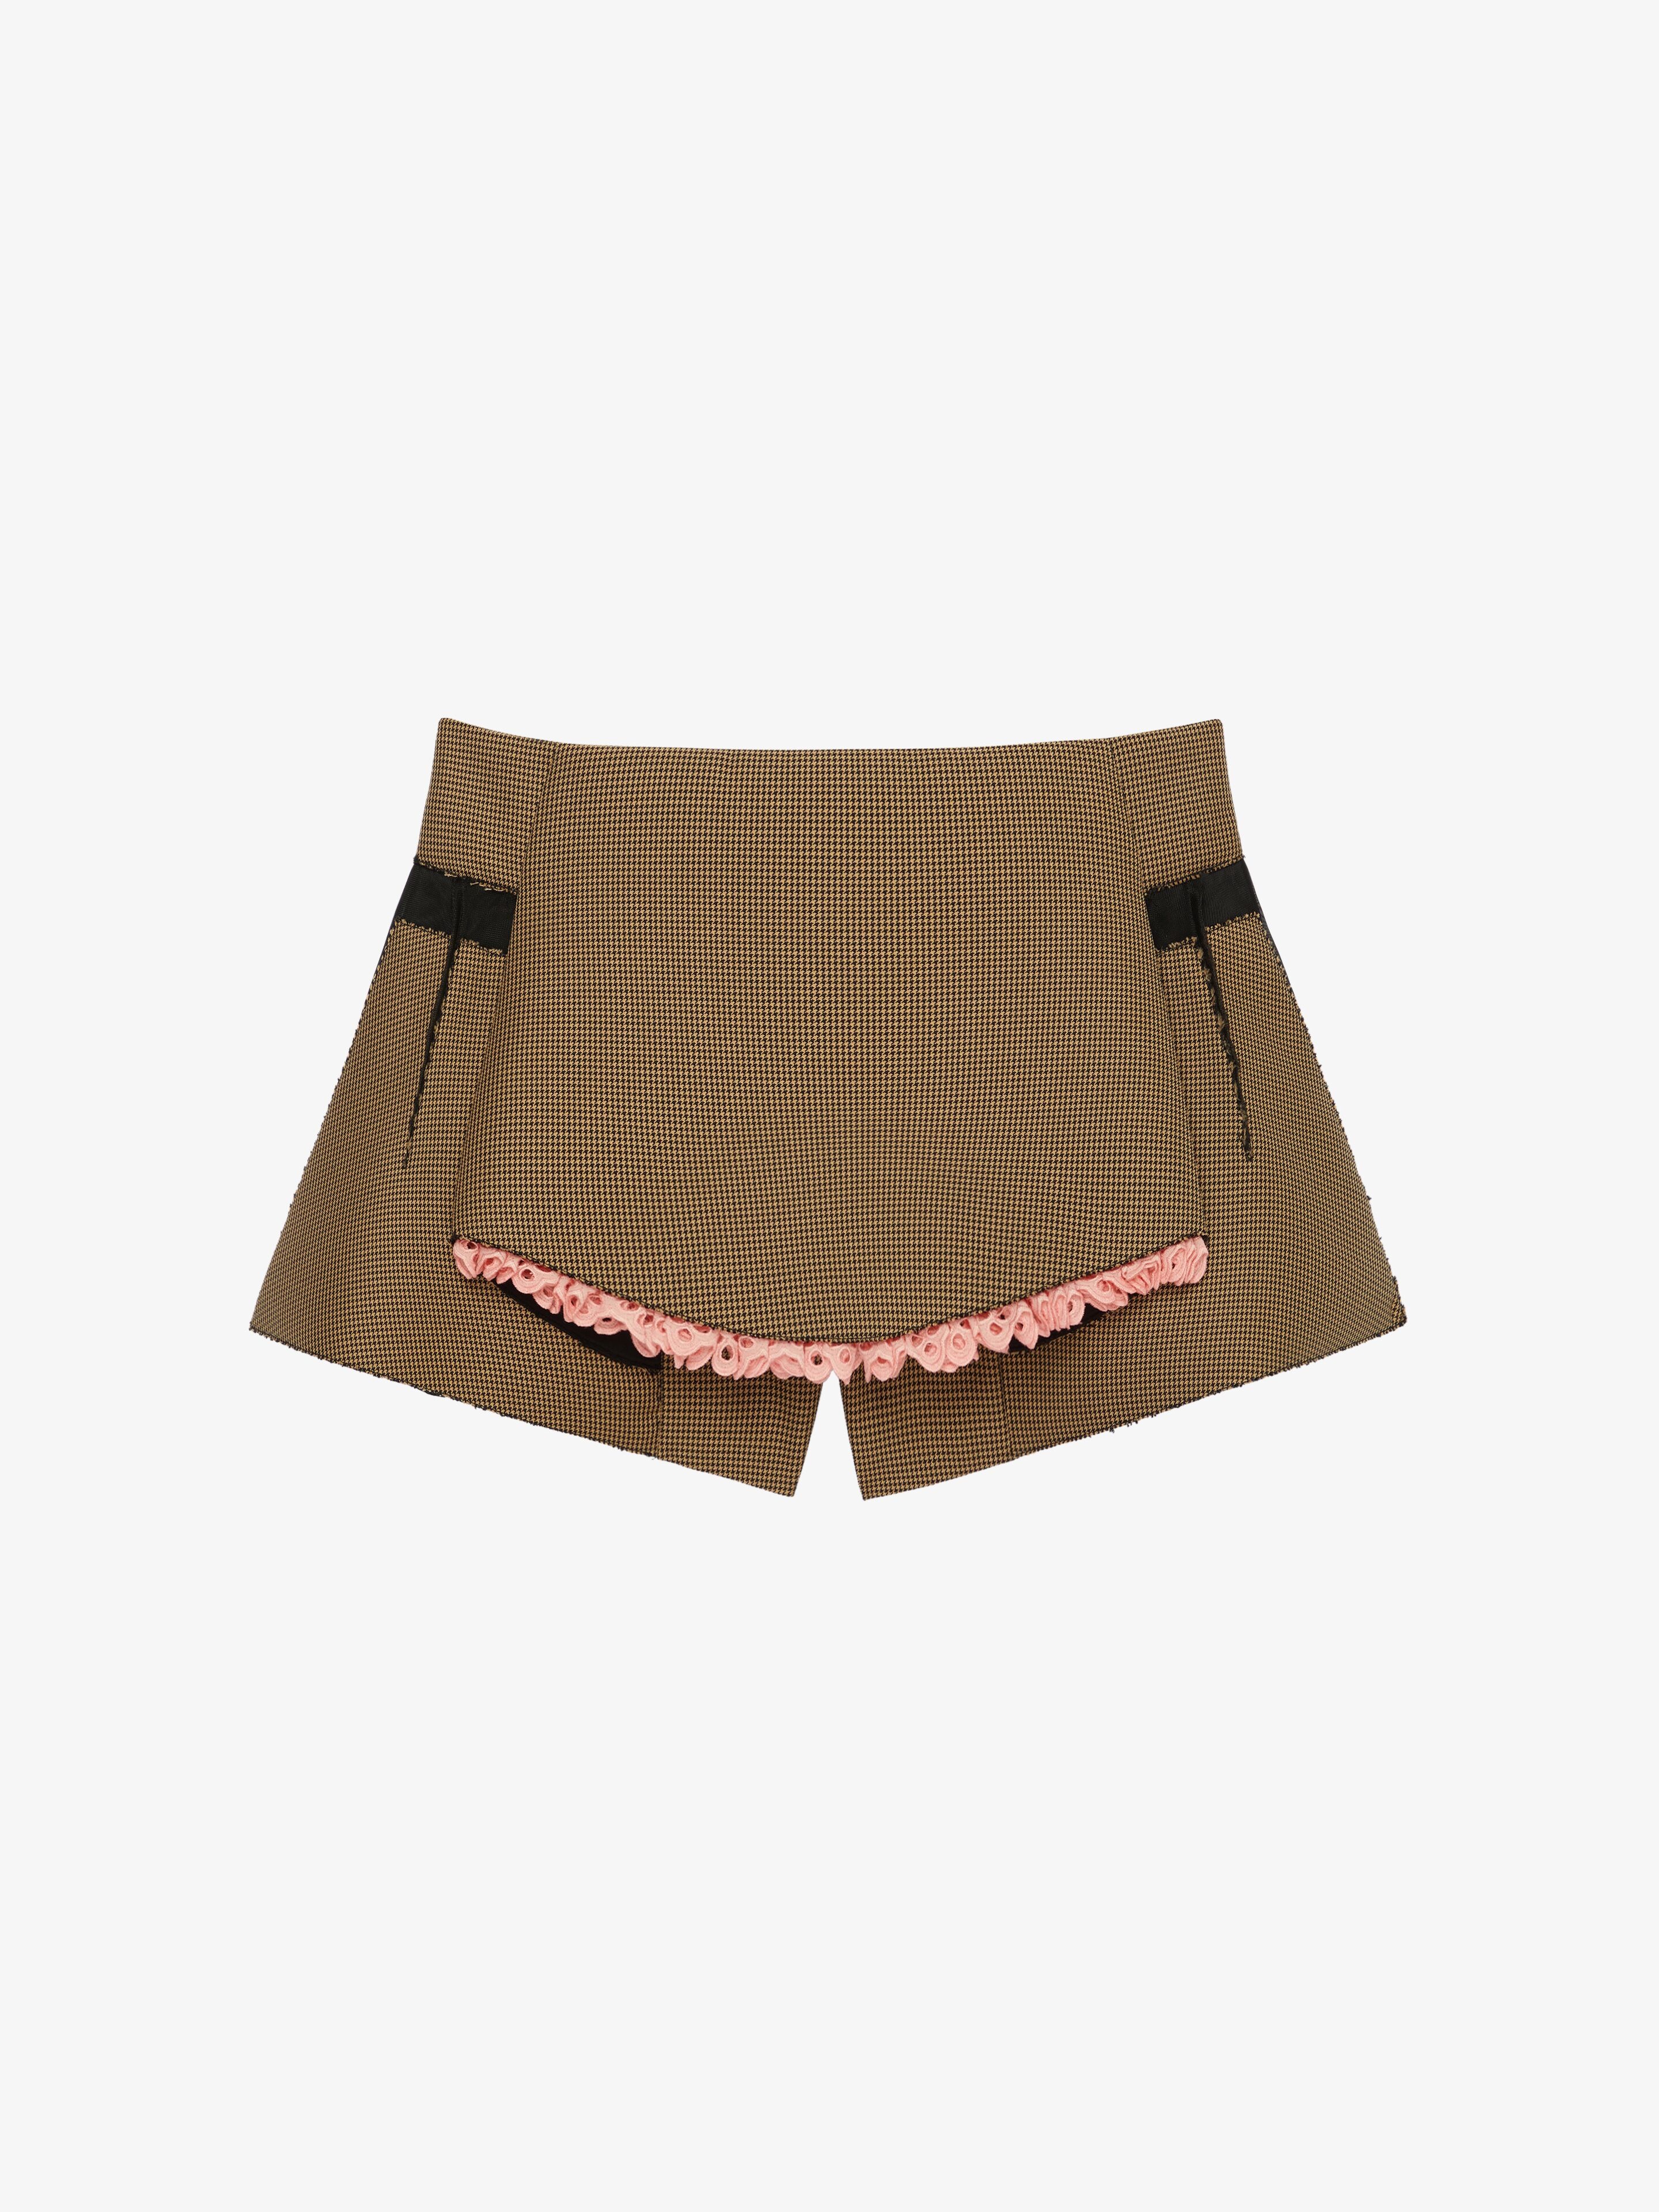 SHORTS IN TECHNICAL FIBER WITH APRON EFFECT AND BRODERIE ANGLAISE - 4